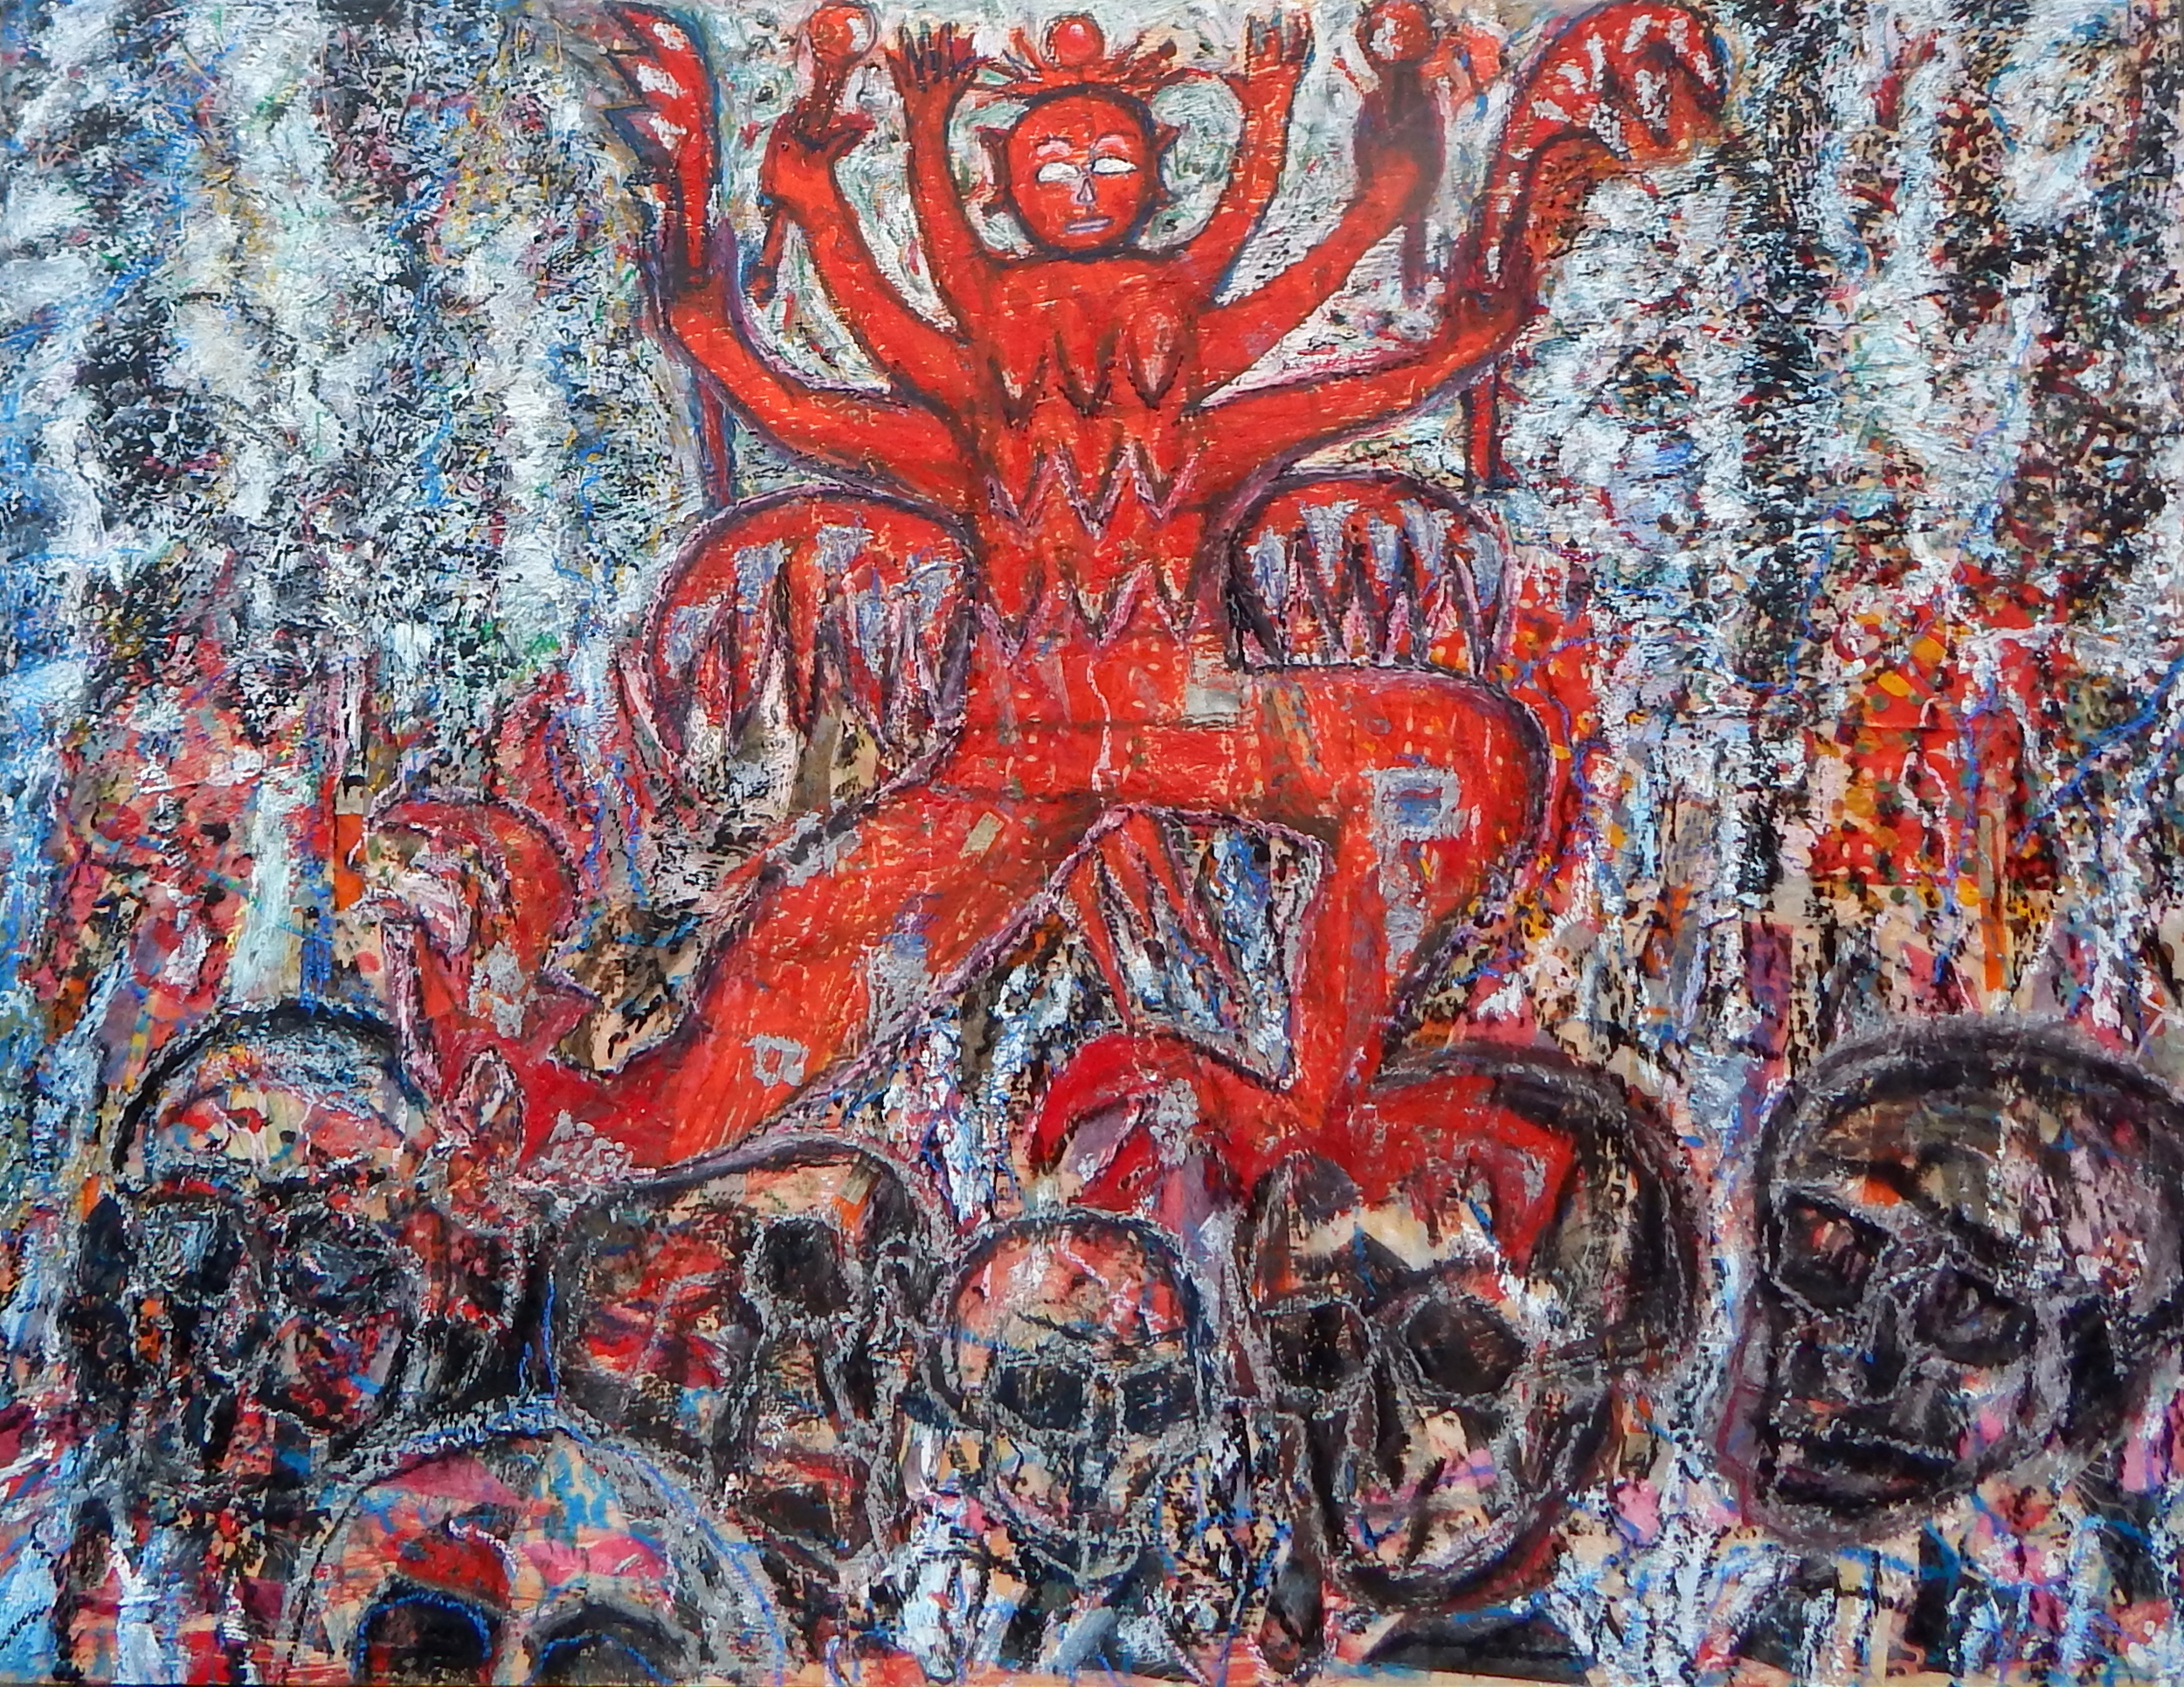  Vanquishing the Ghosts, encaustic and oil, 2014